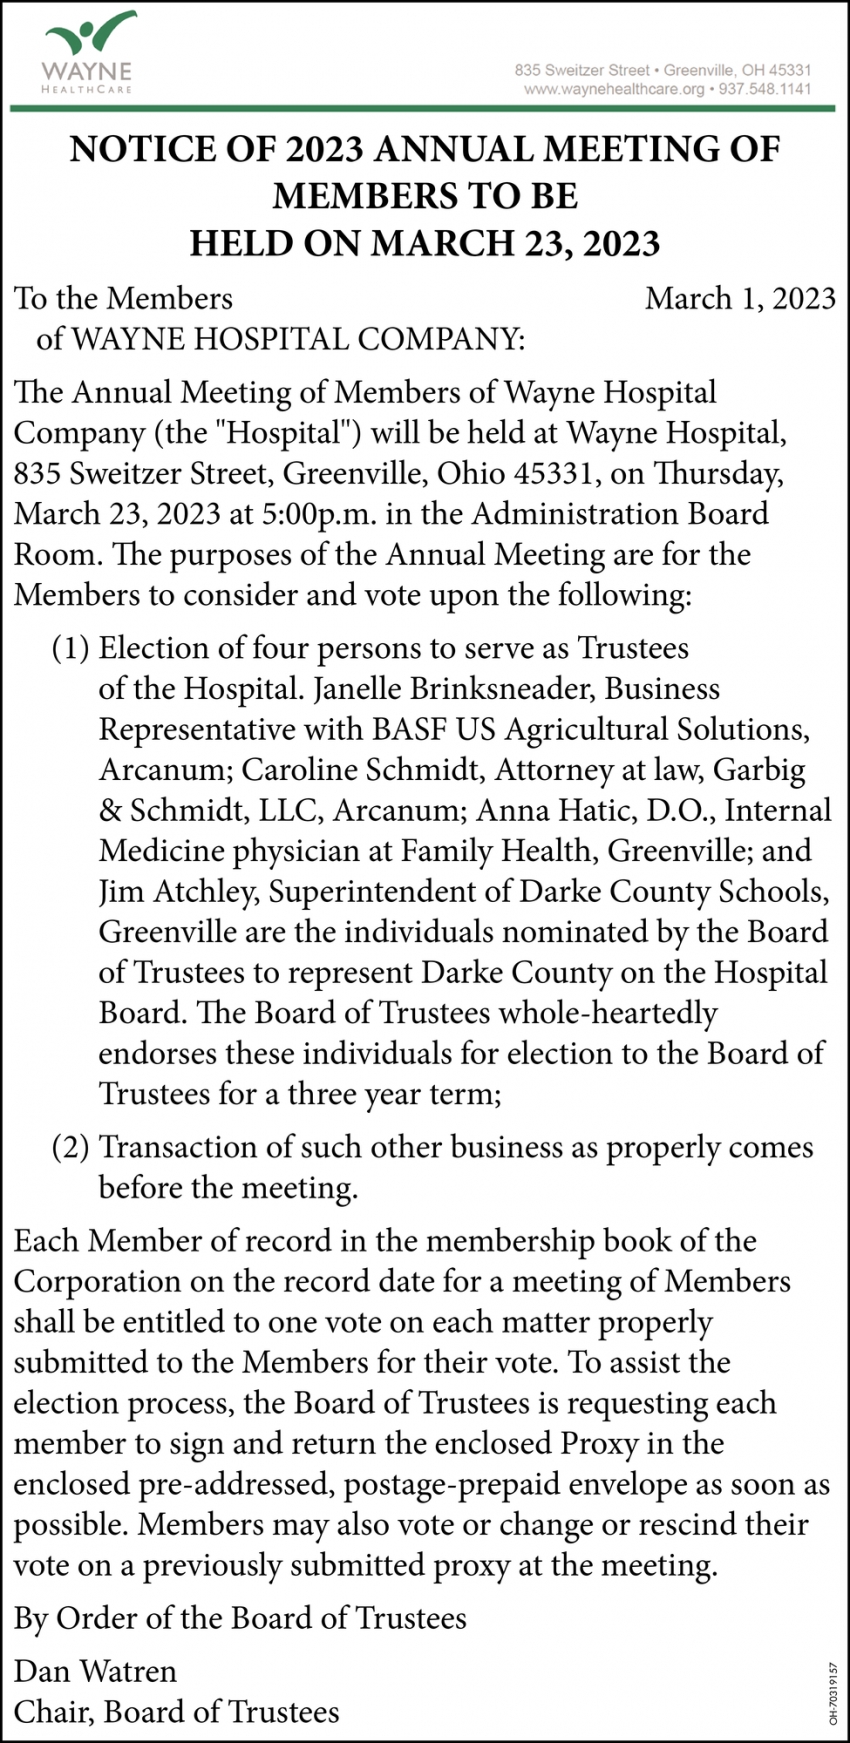 Notice Of 2023 Annual Meeting